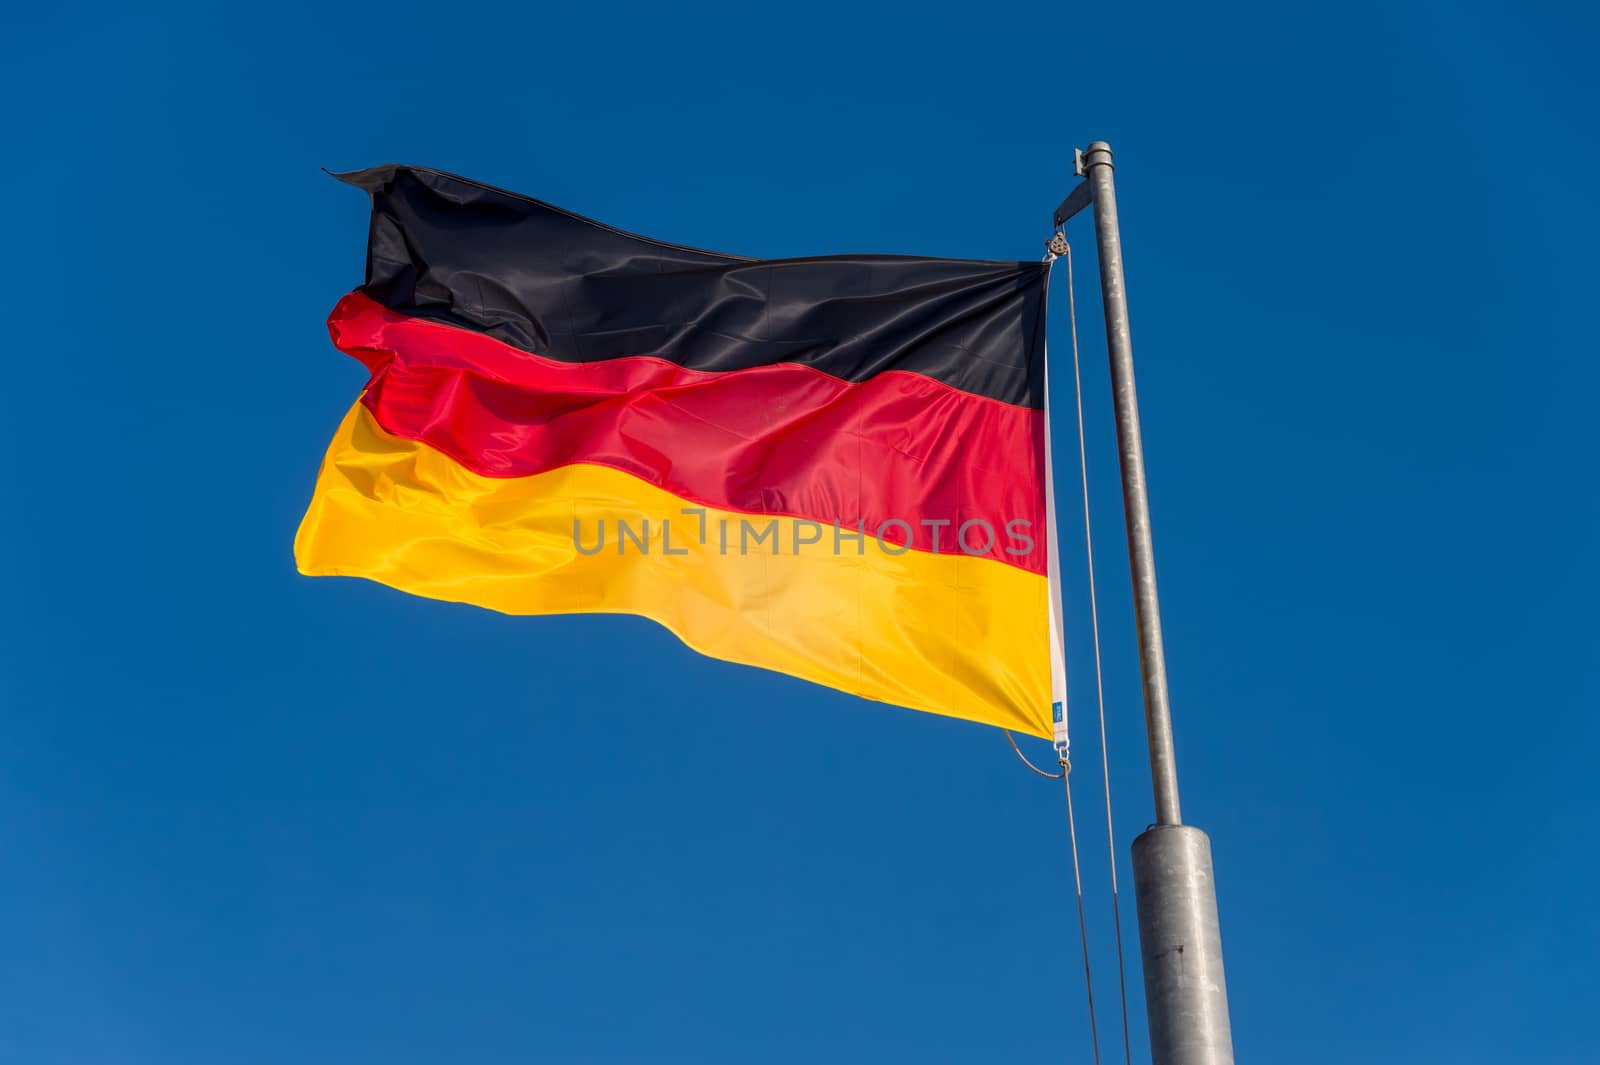 German flag waving against blue sky in Boulogne sur Mer, France. by mbruxelle